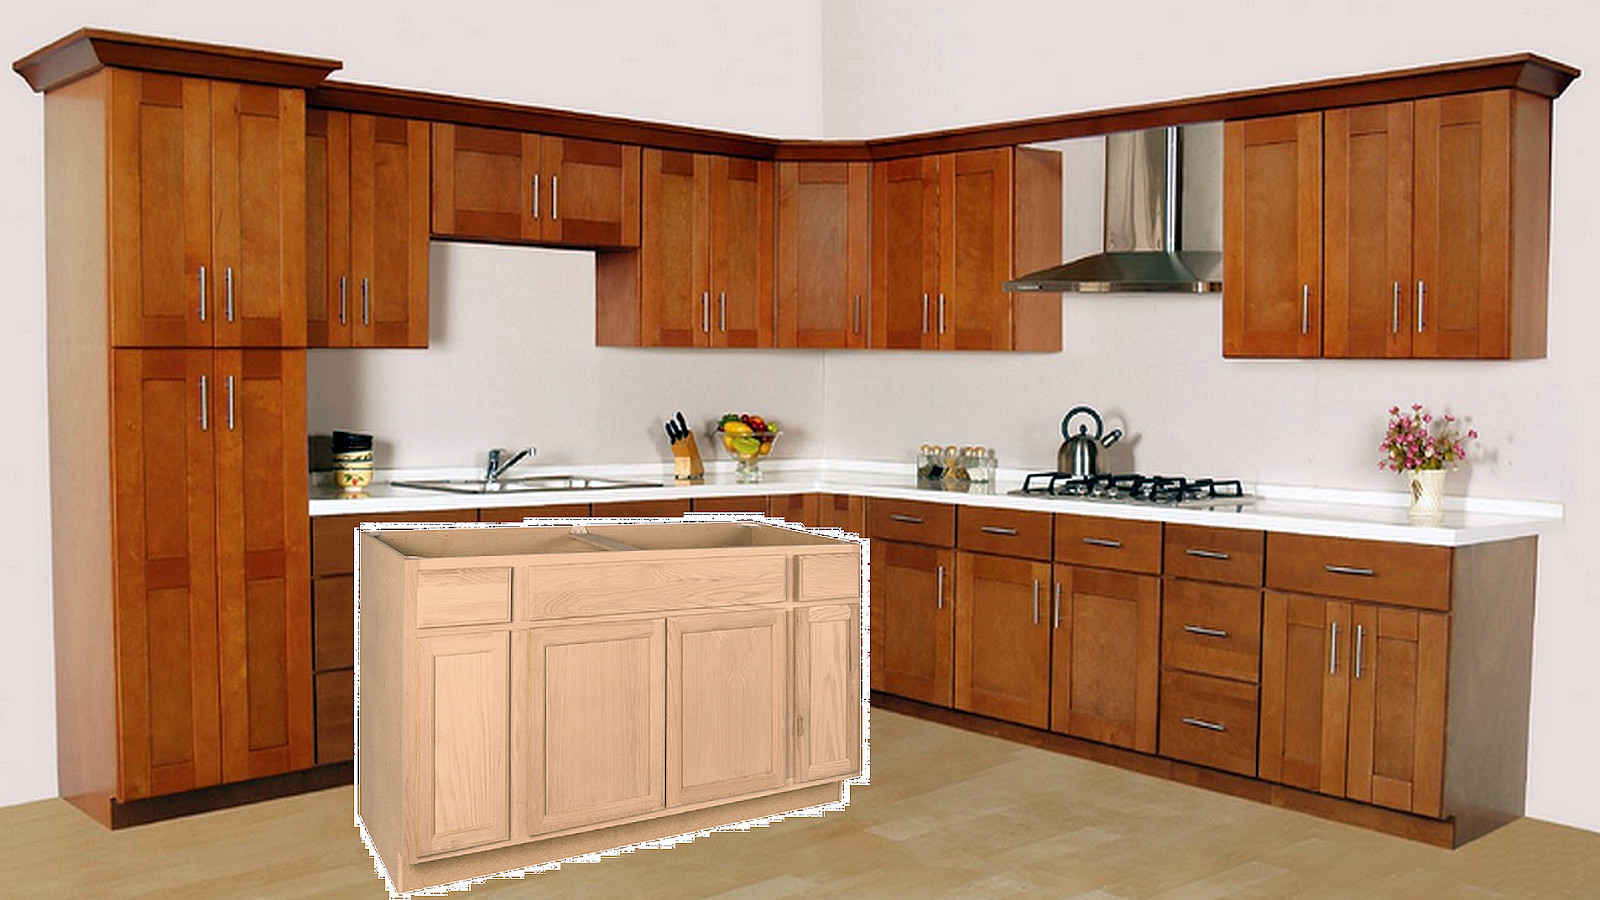 Home Depot Unfinished Kitchen Cabinets
 how to finish unfinished kitchen cabinets